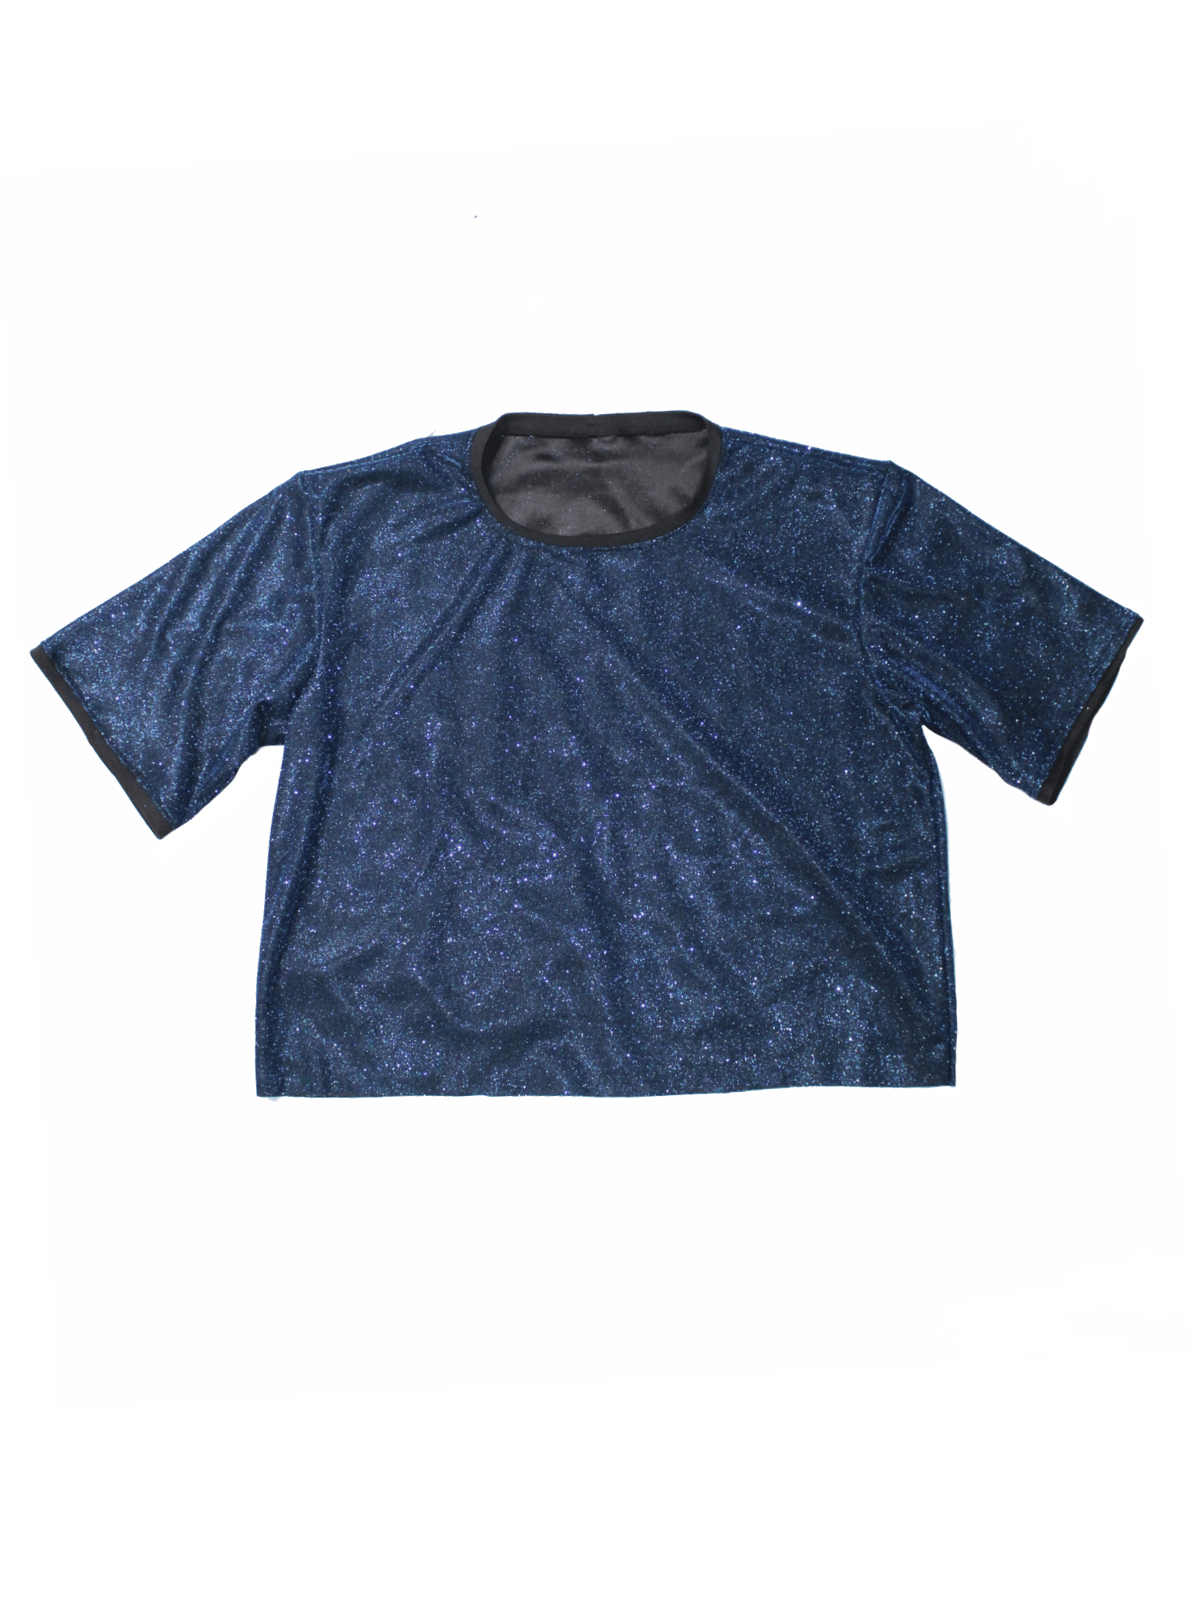 Image of Blue glitter shirt (Full length and cropped)